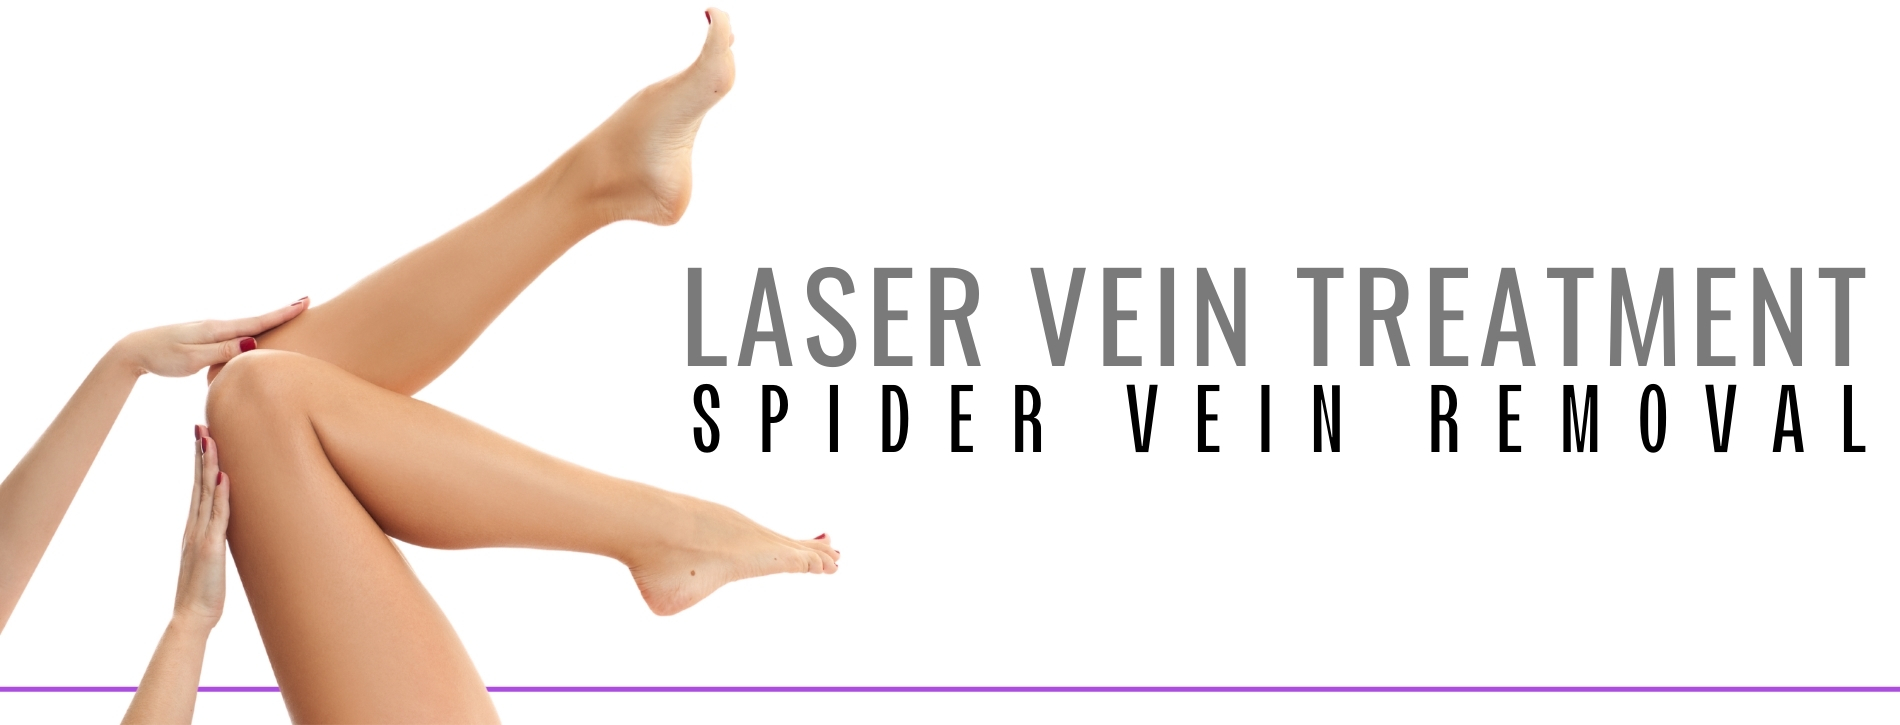 Woman's legs showing results of spider vein removal from laser vein treatment.